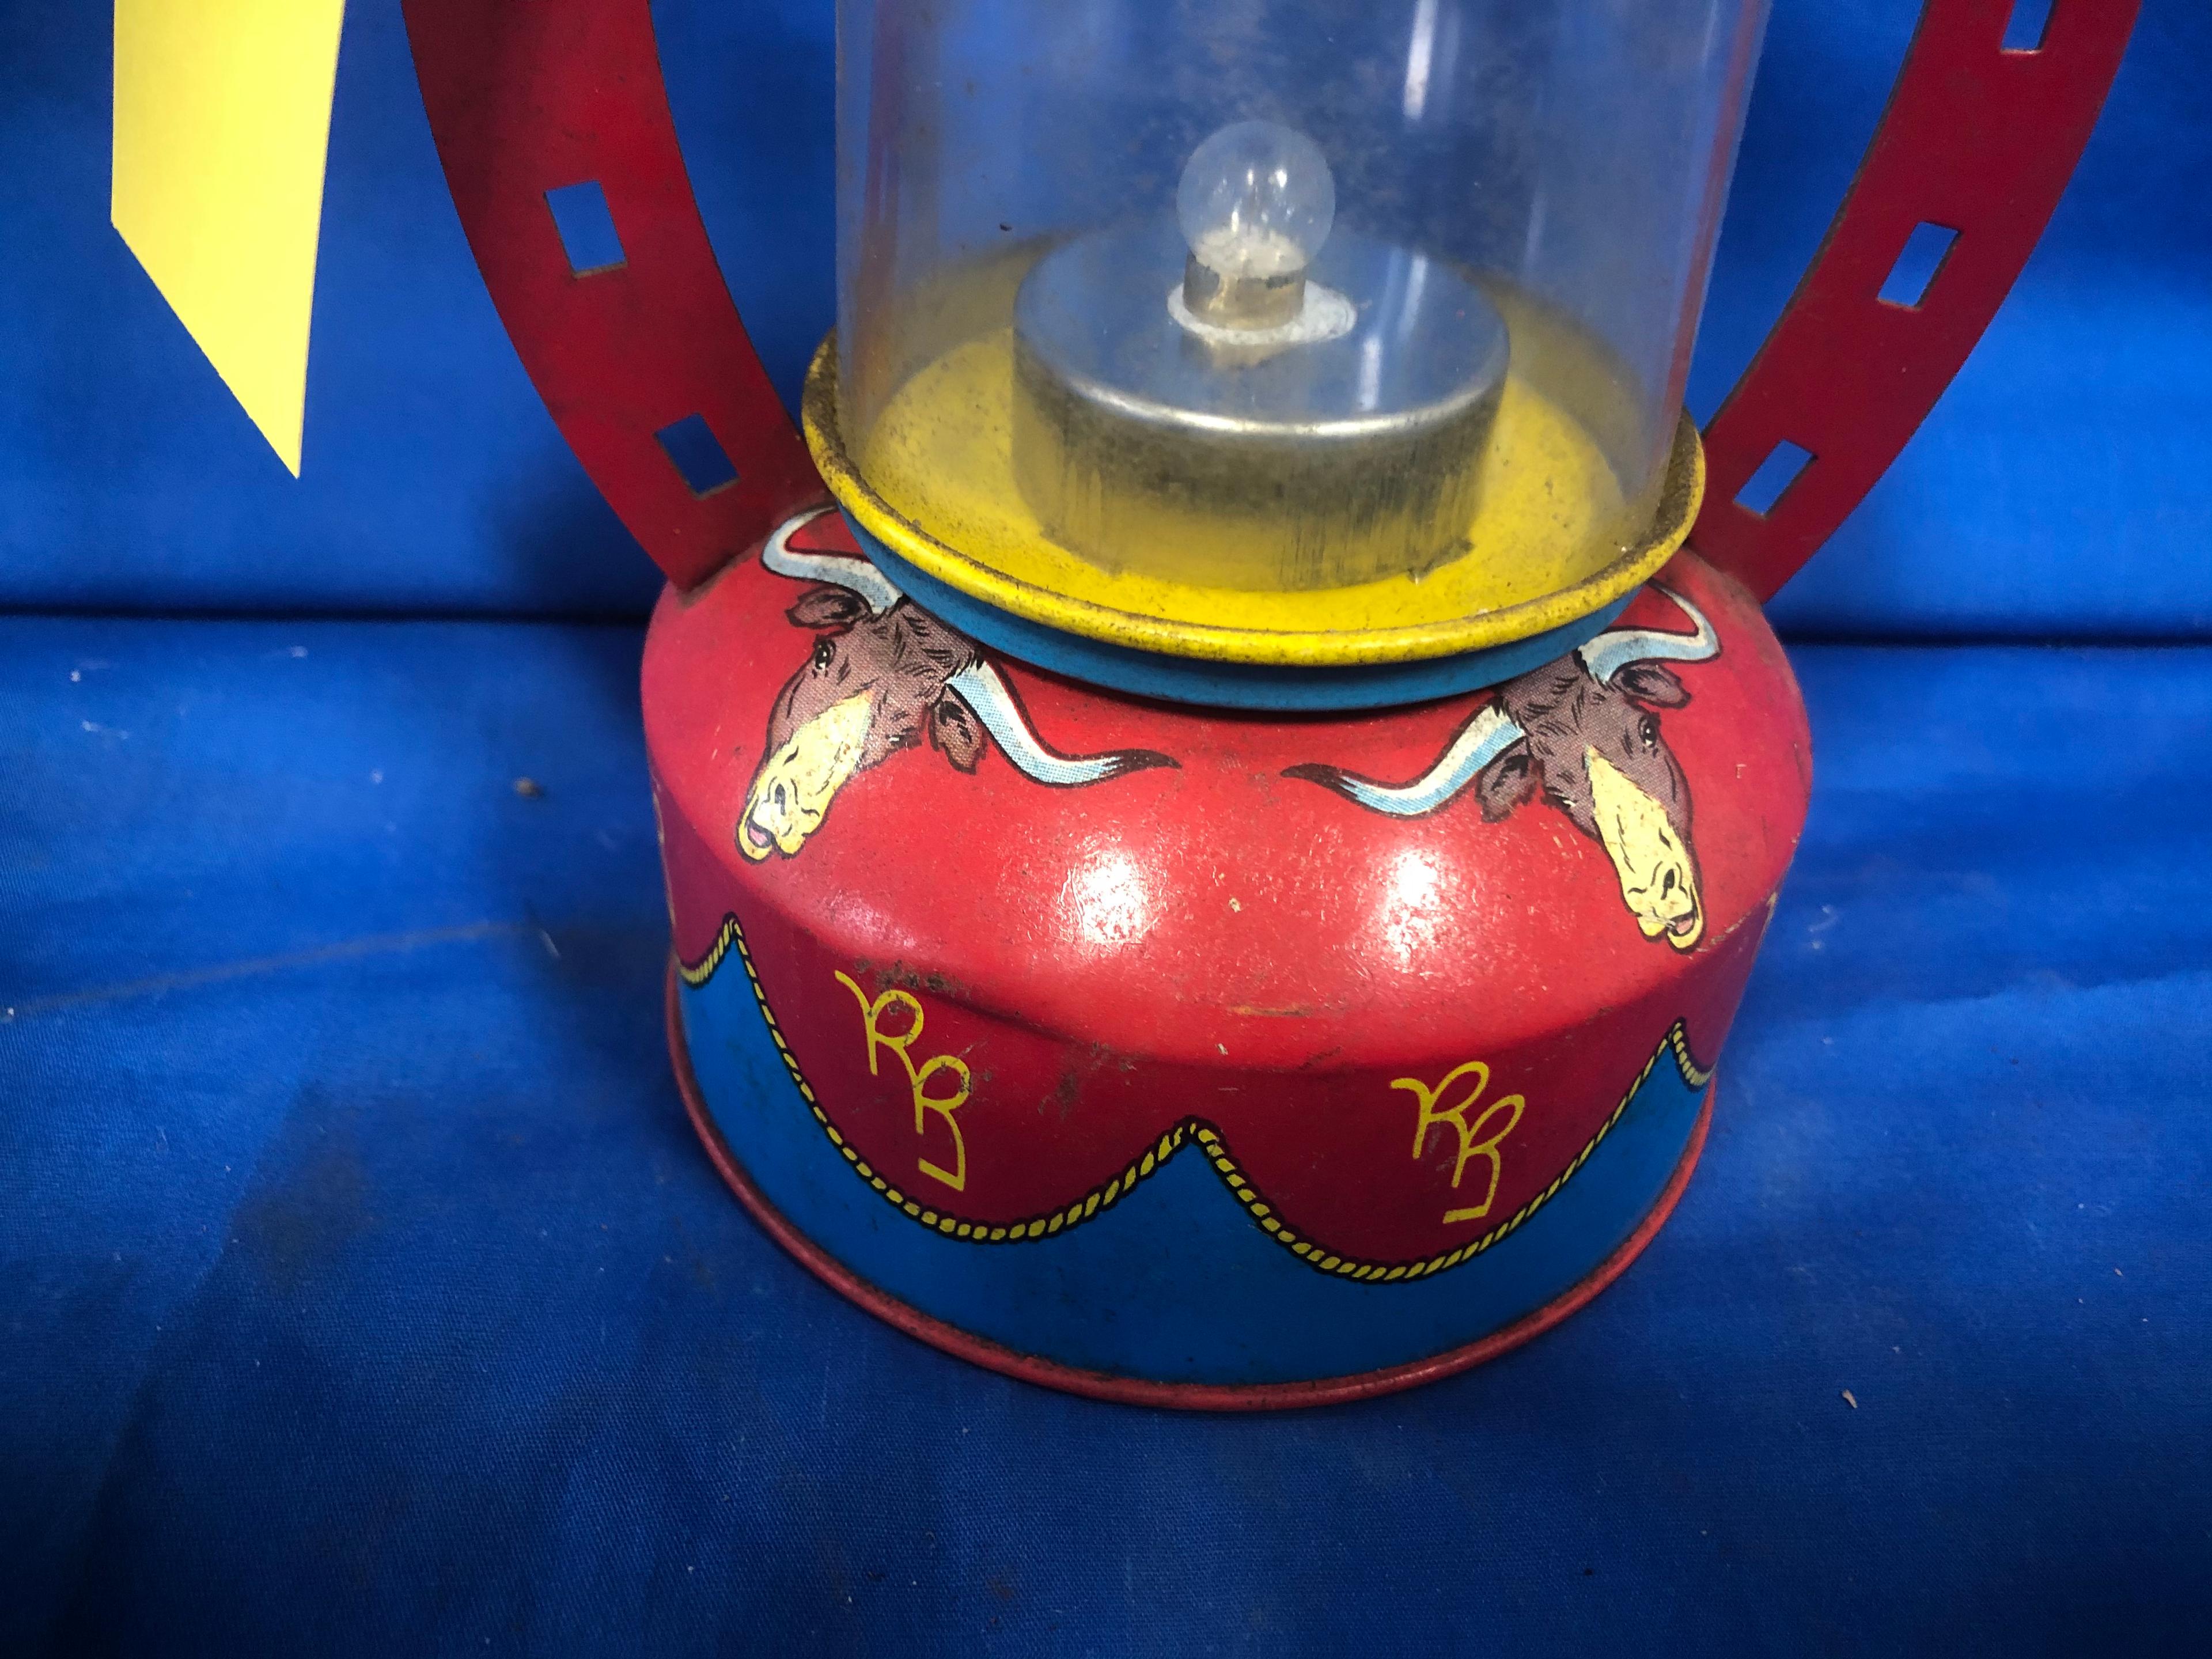 ROY ROGERS BATTERY OPERATED CHILD'S LANTERN